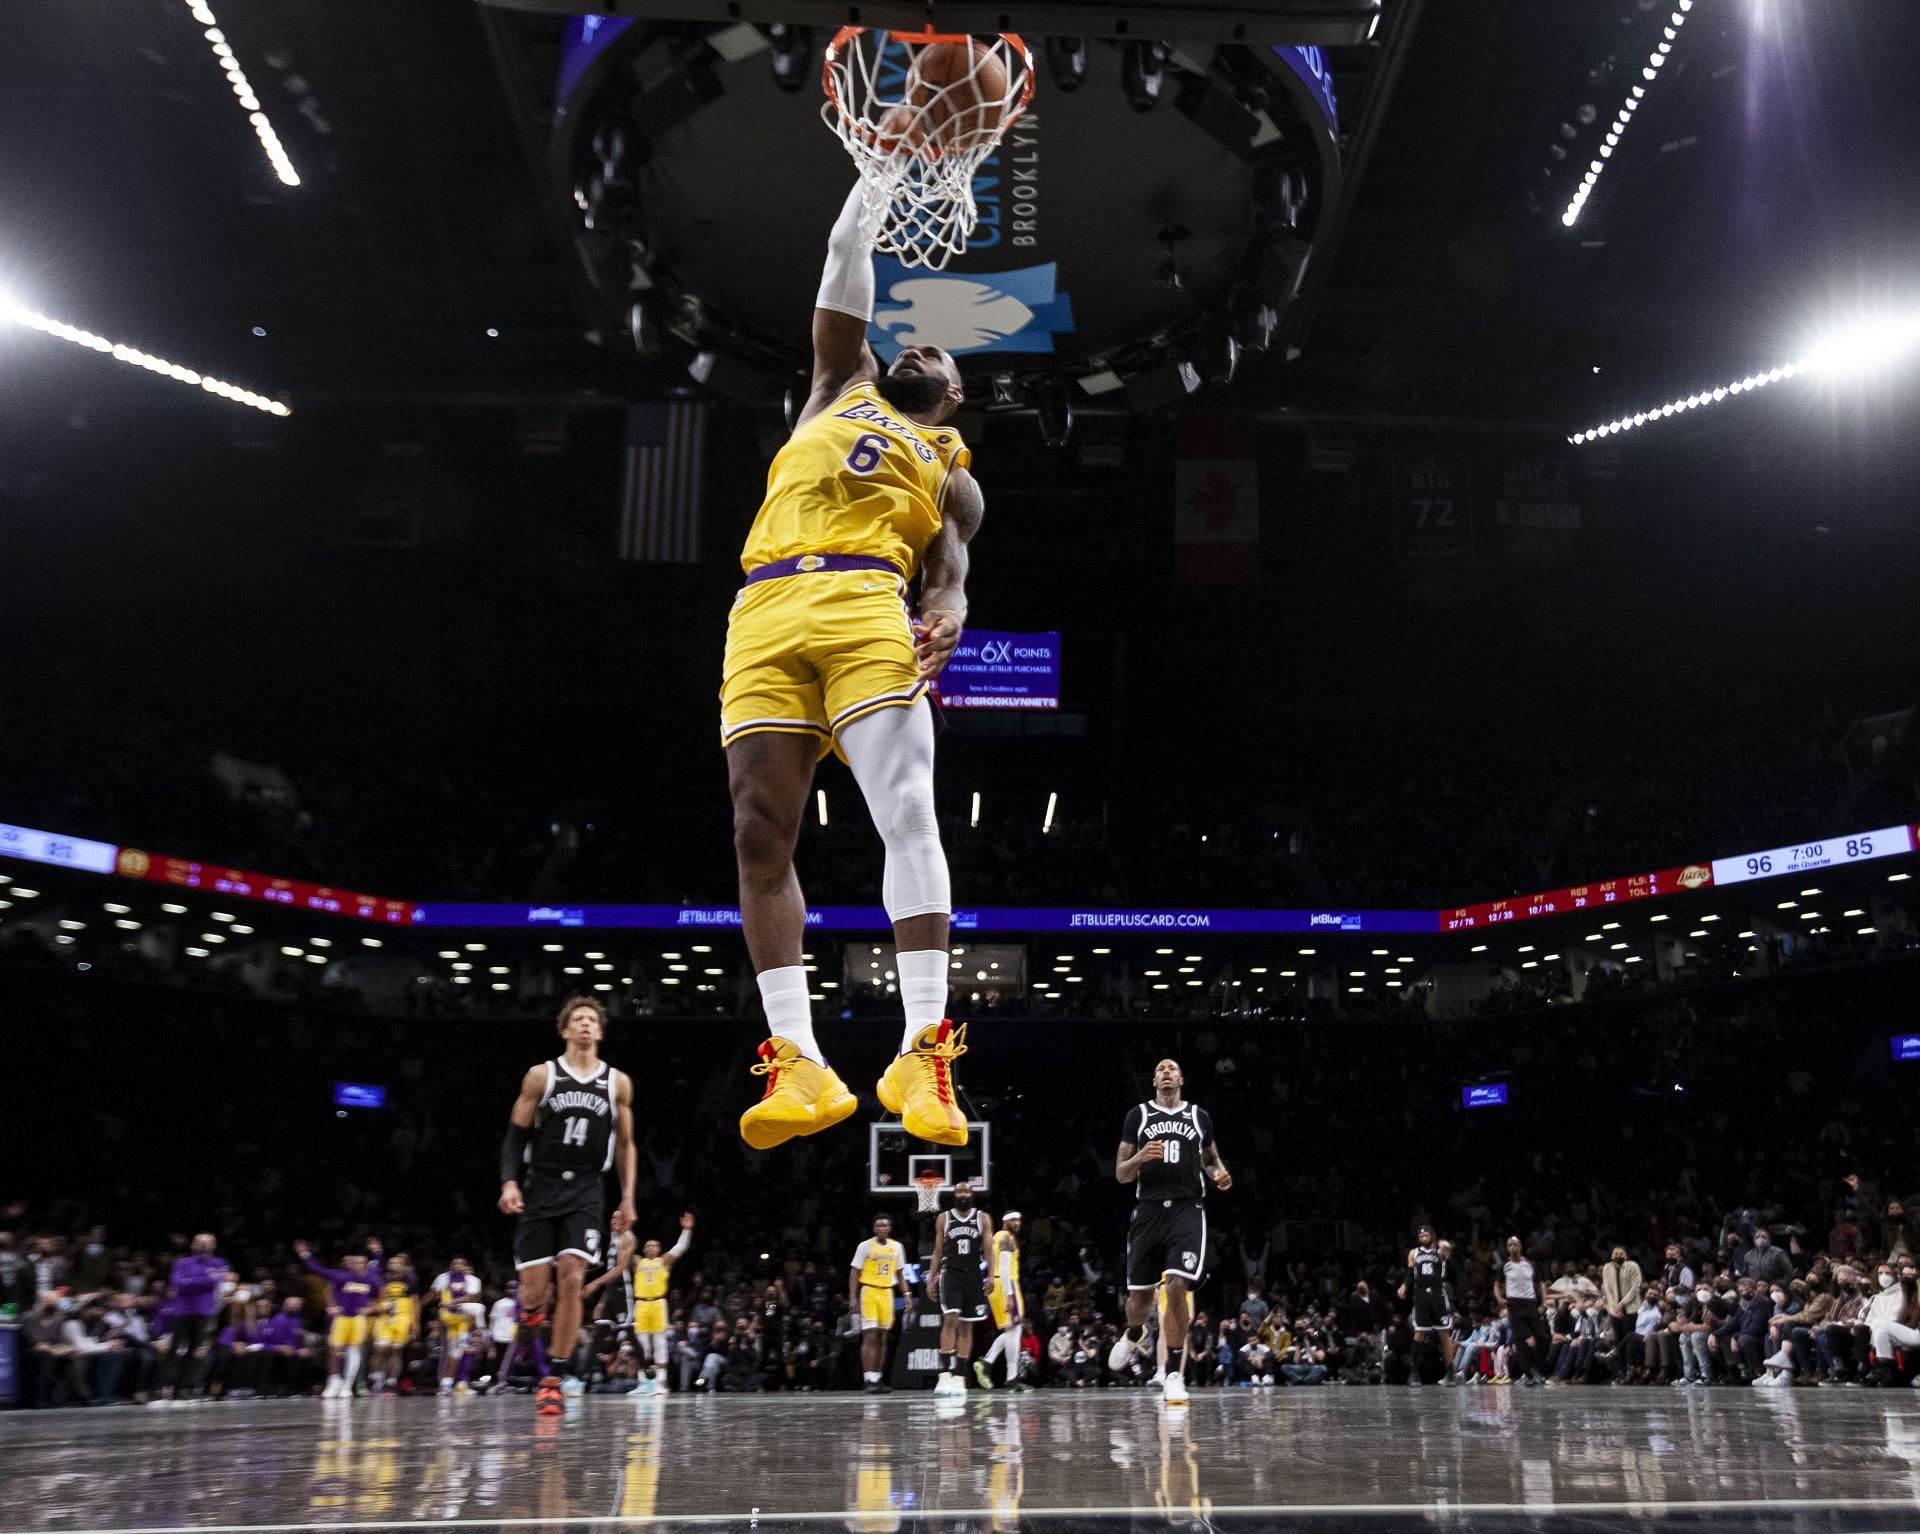 LeBron James goes up for a dunk against the Brooklyn Nets.